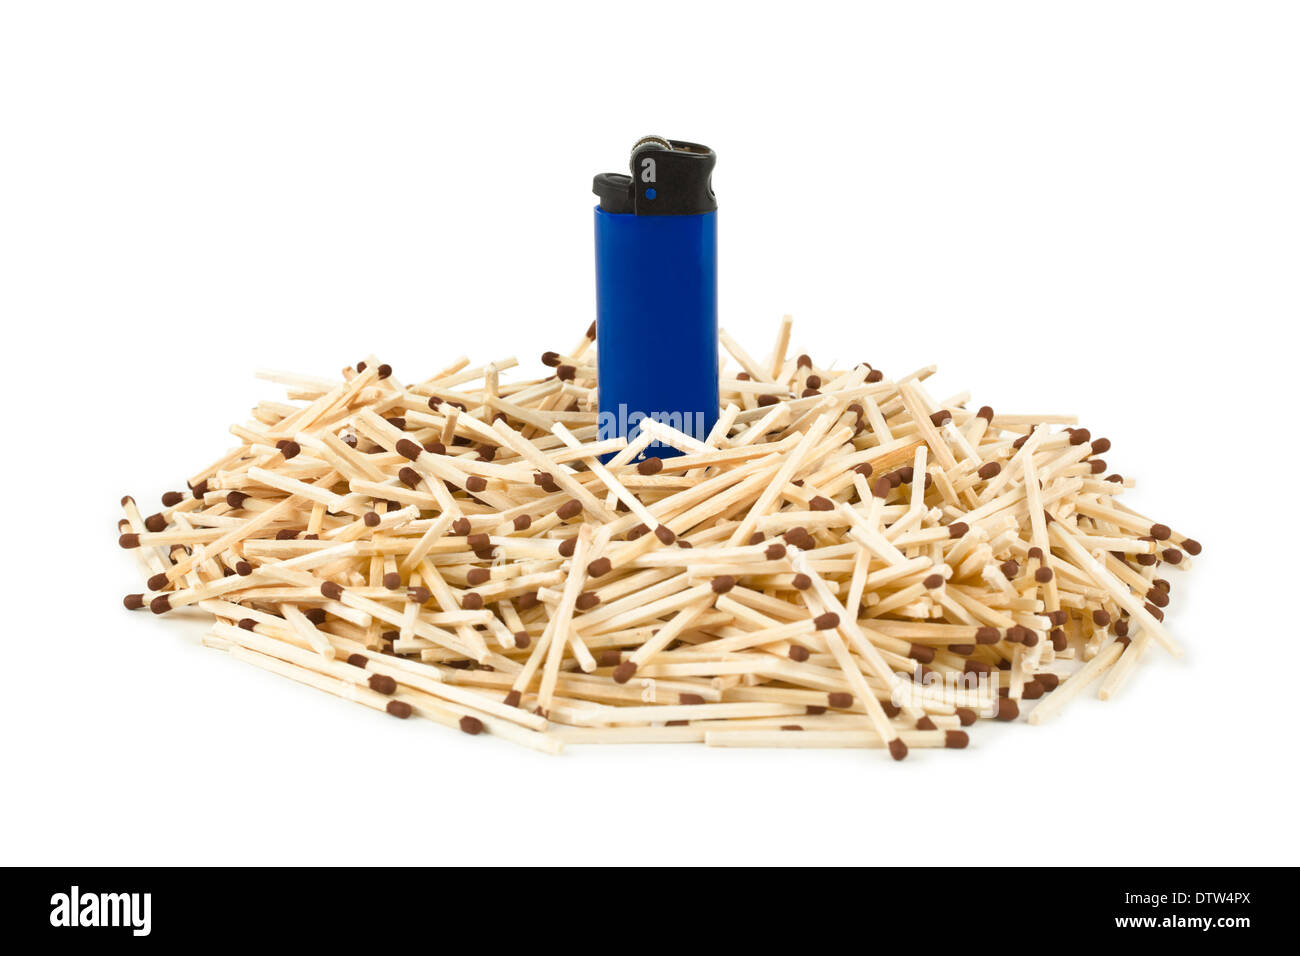 Matches and lighter - leadership concept Stock Photo